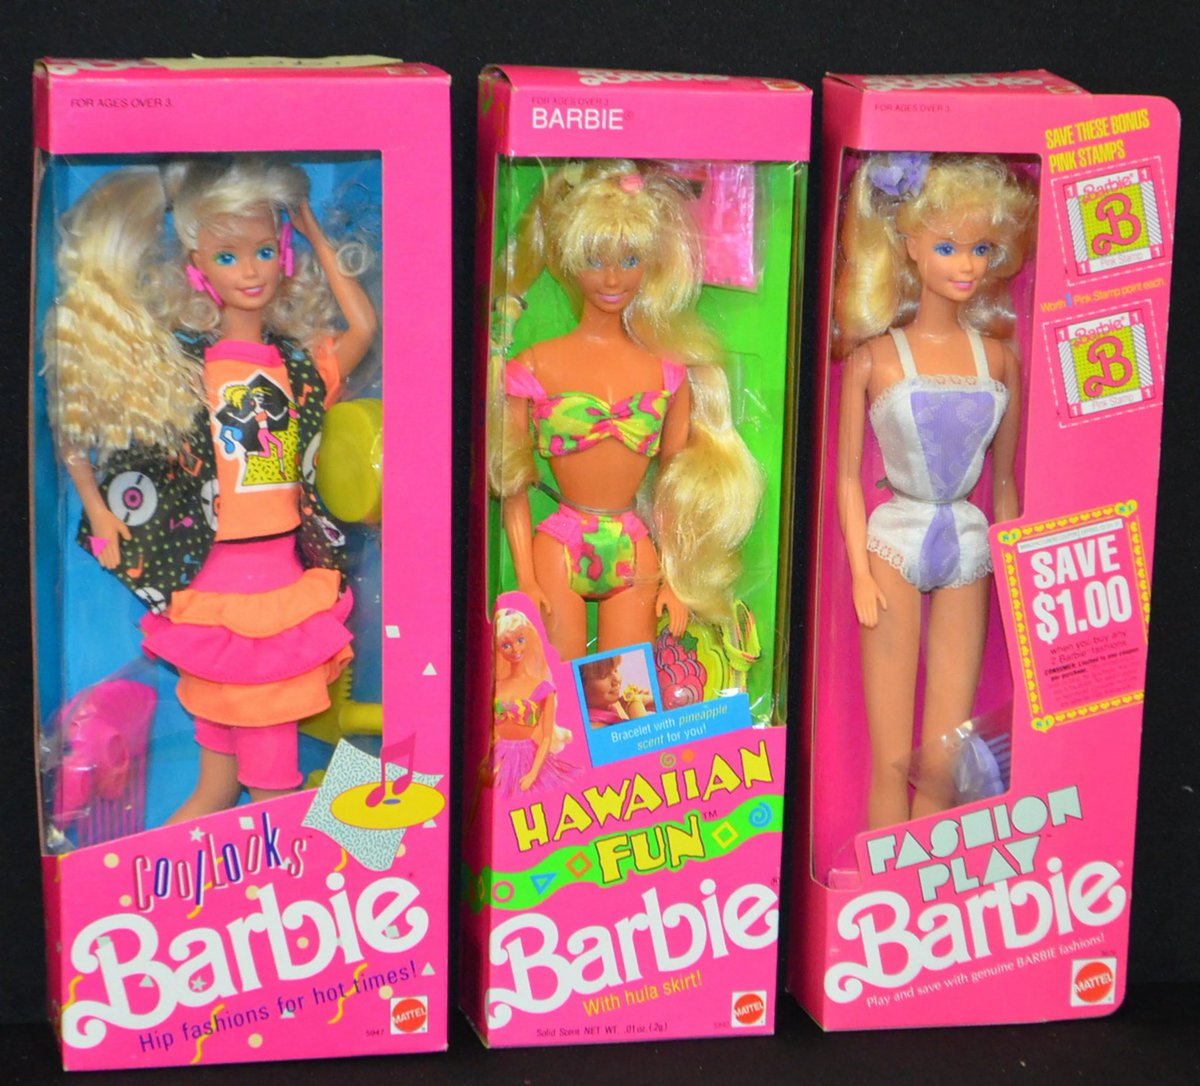 Like, in my head I was like “Barbie’s basically looked the same since I was a kid, it was the Barbies before my childhood that looked weird, then I realized like “oh, these would look dated as shit to modern children”